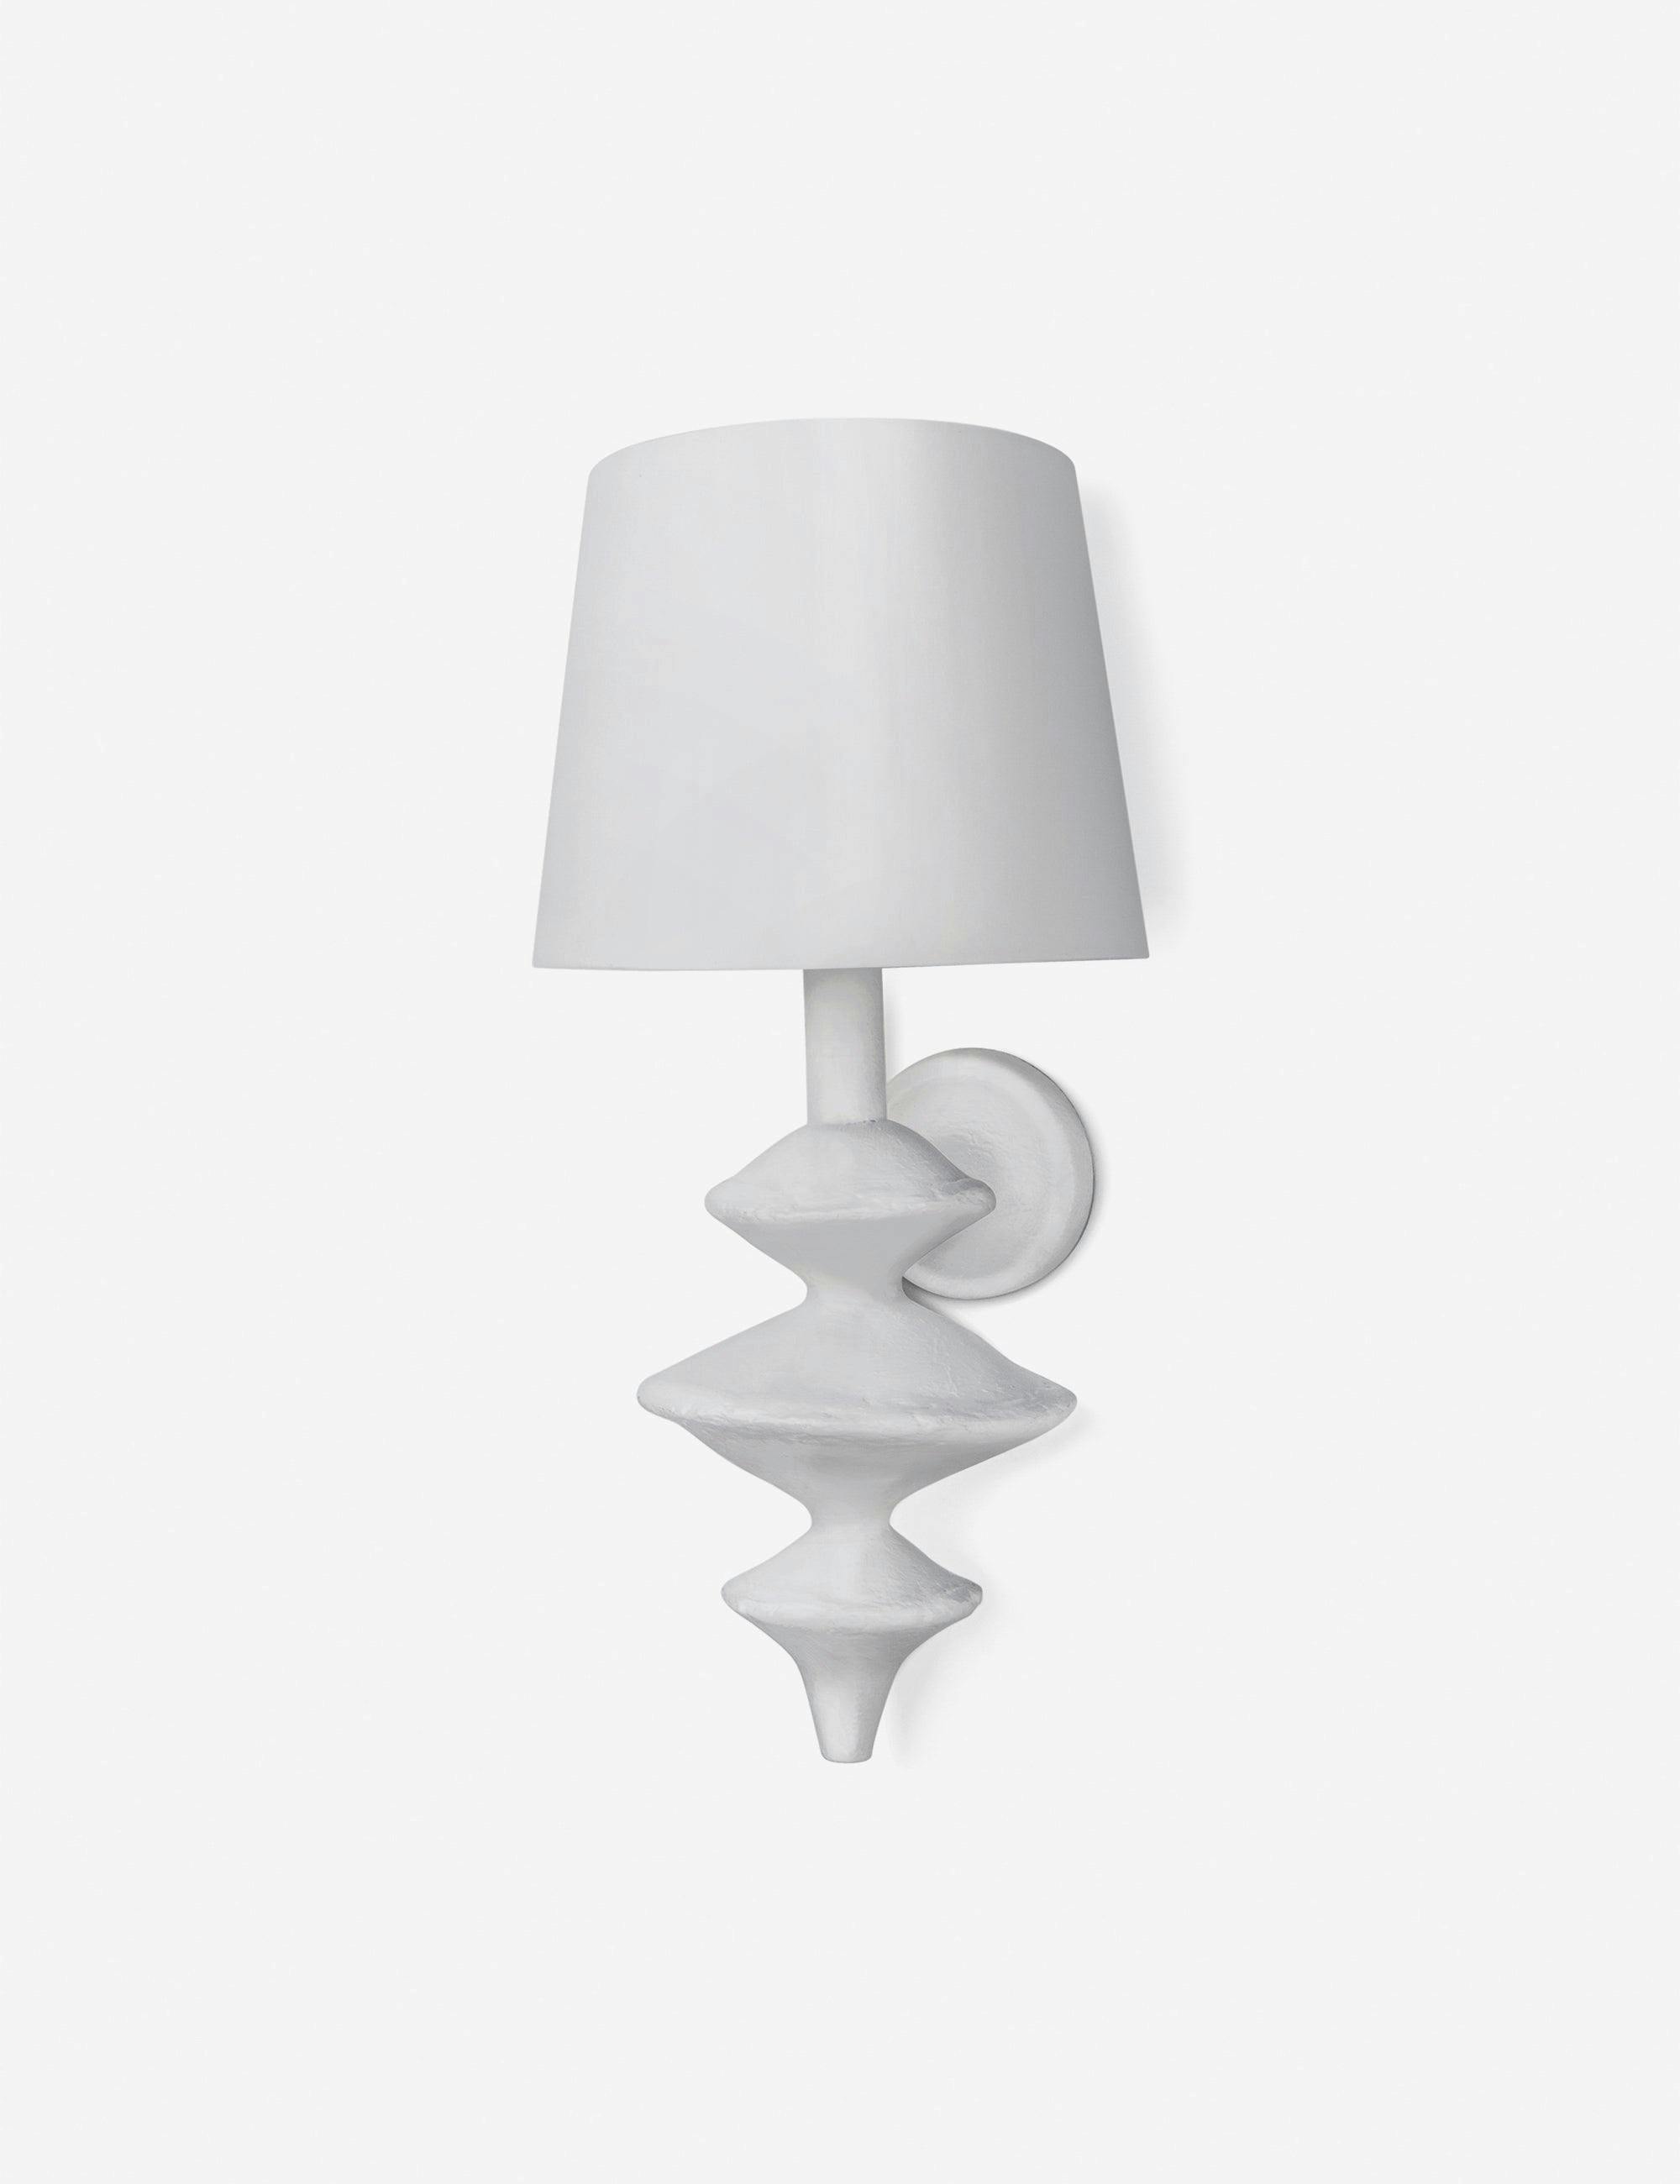 Matte White Linen-Shade Dimmable Steel Wall Sconce